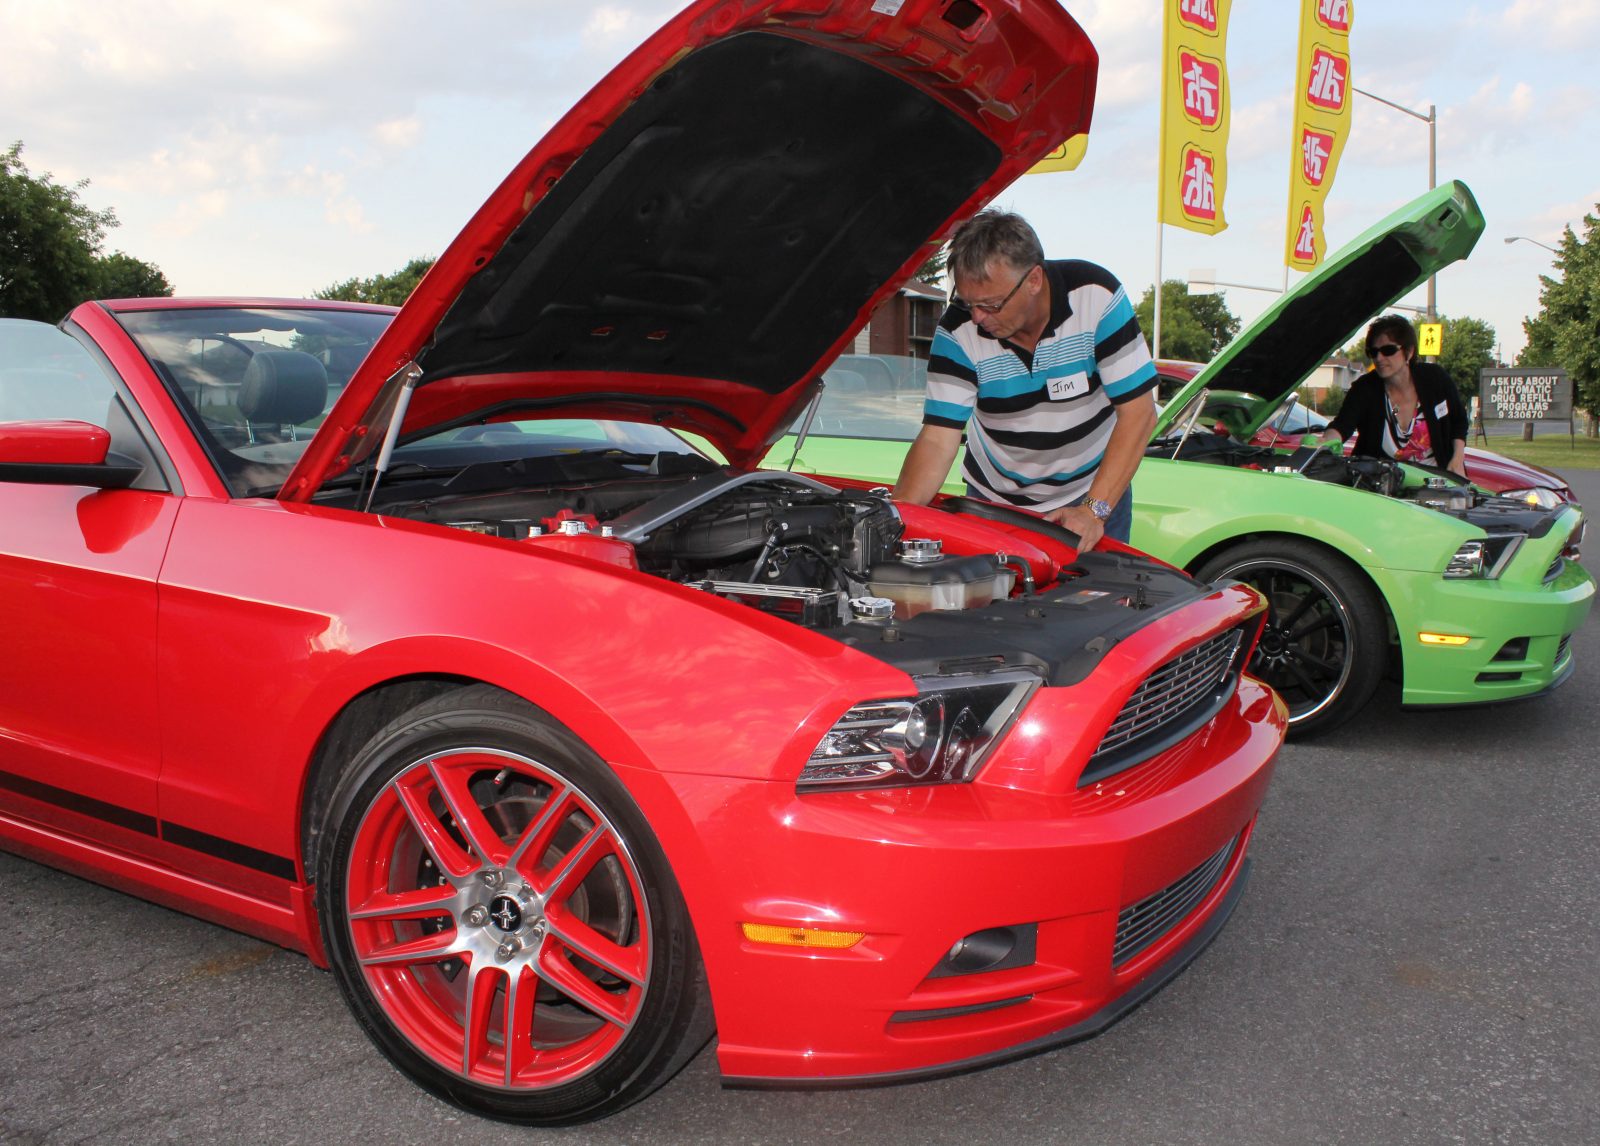 Car club revved up for Mustangs